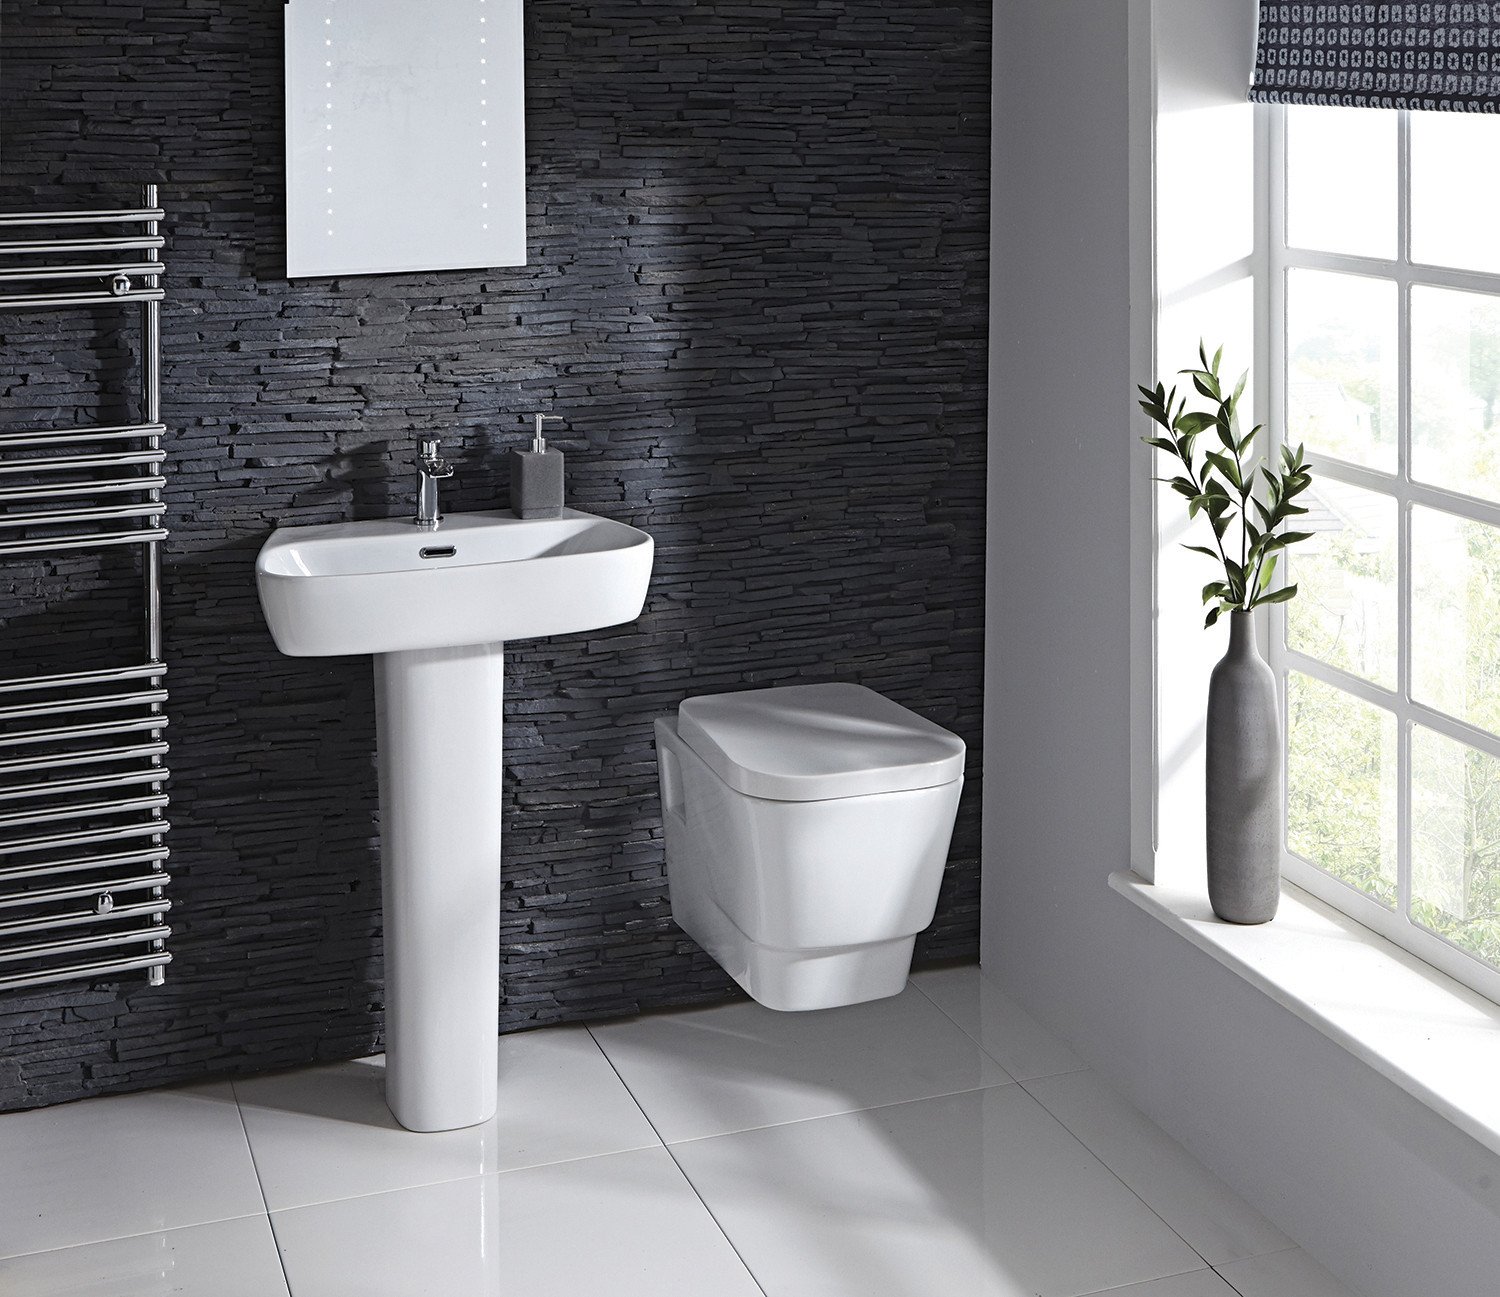 Cubix Wall-Hung Toilet with Soft-Close Seat | FrontlineBathrooms.com